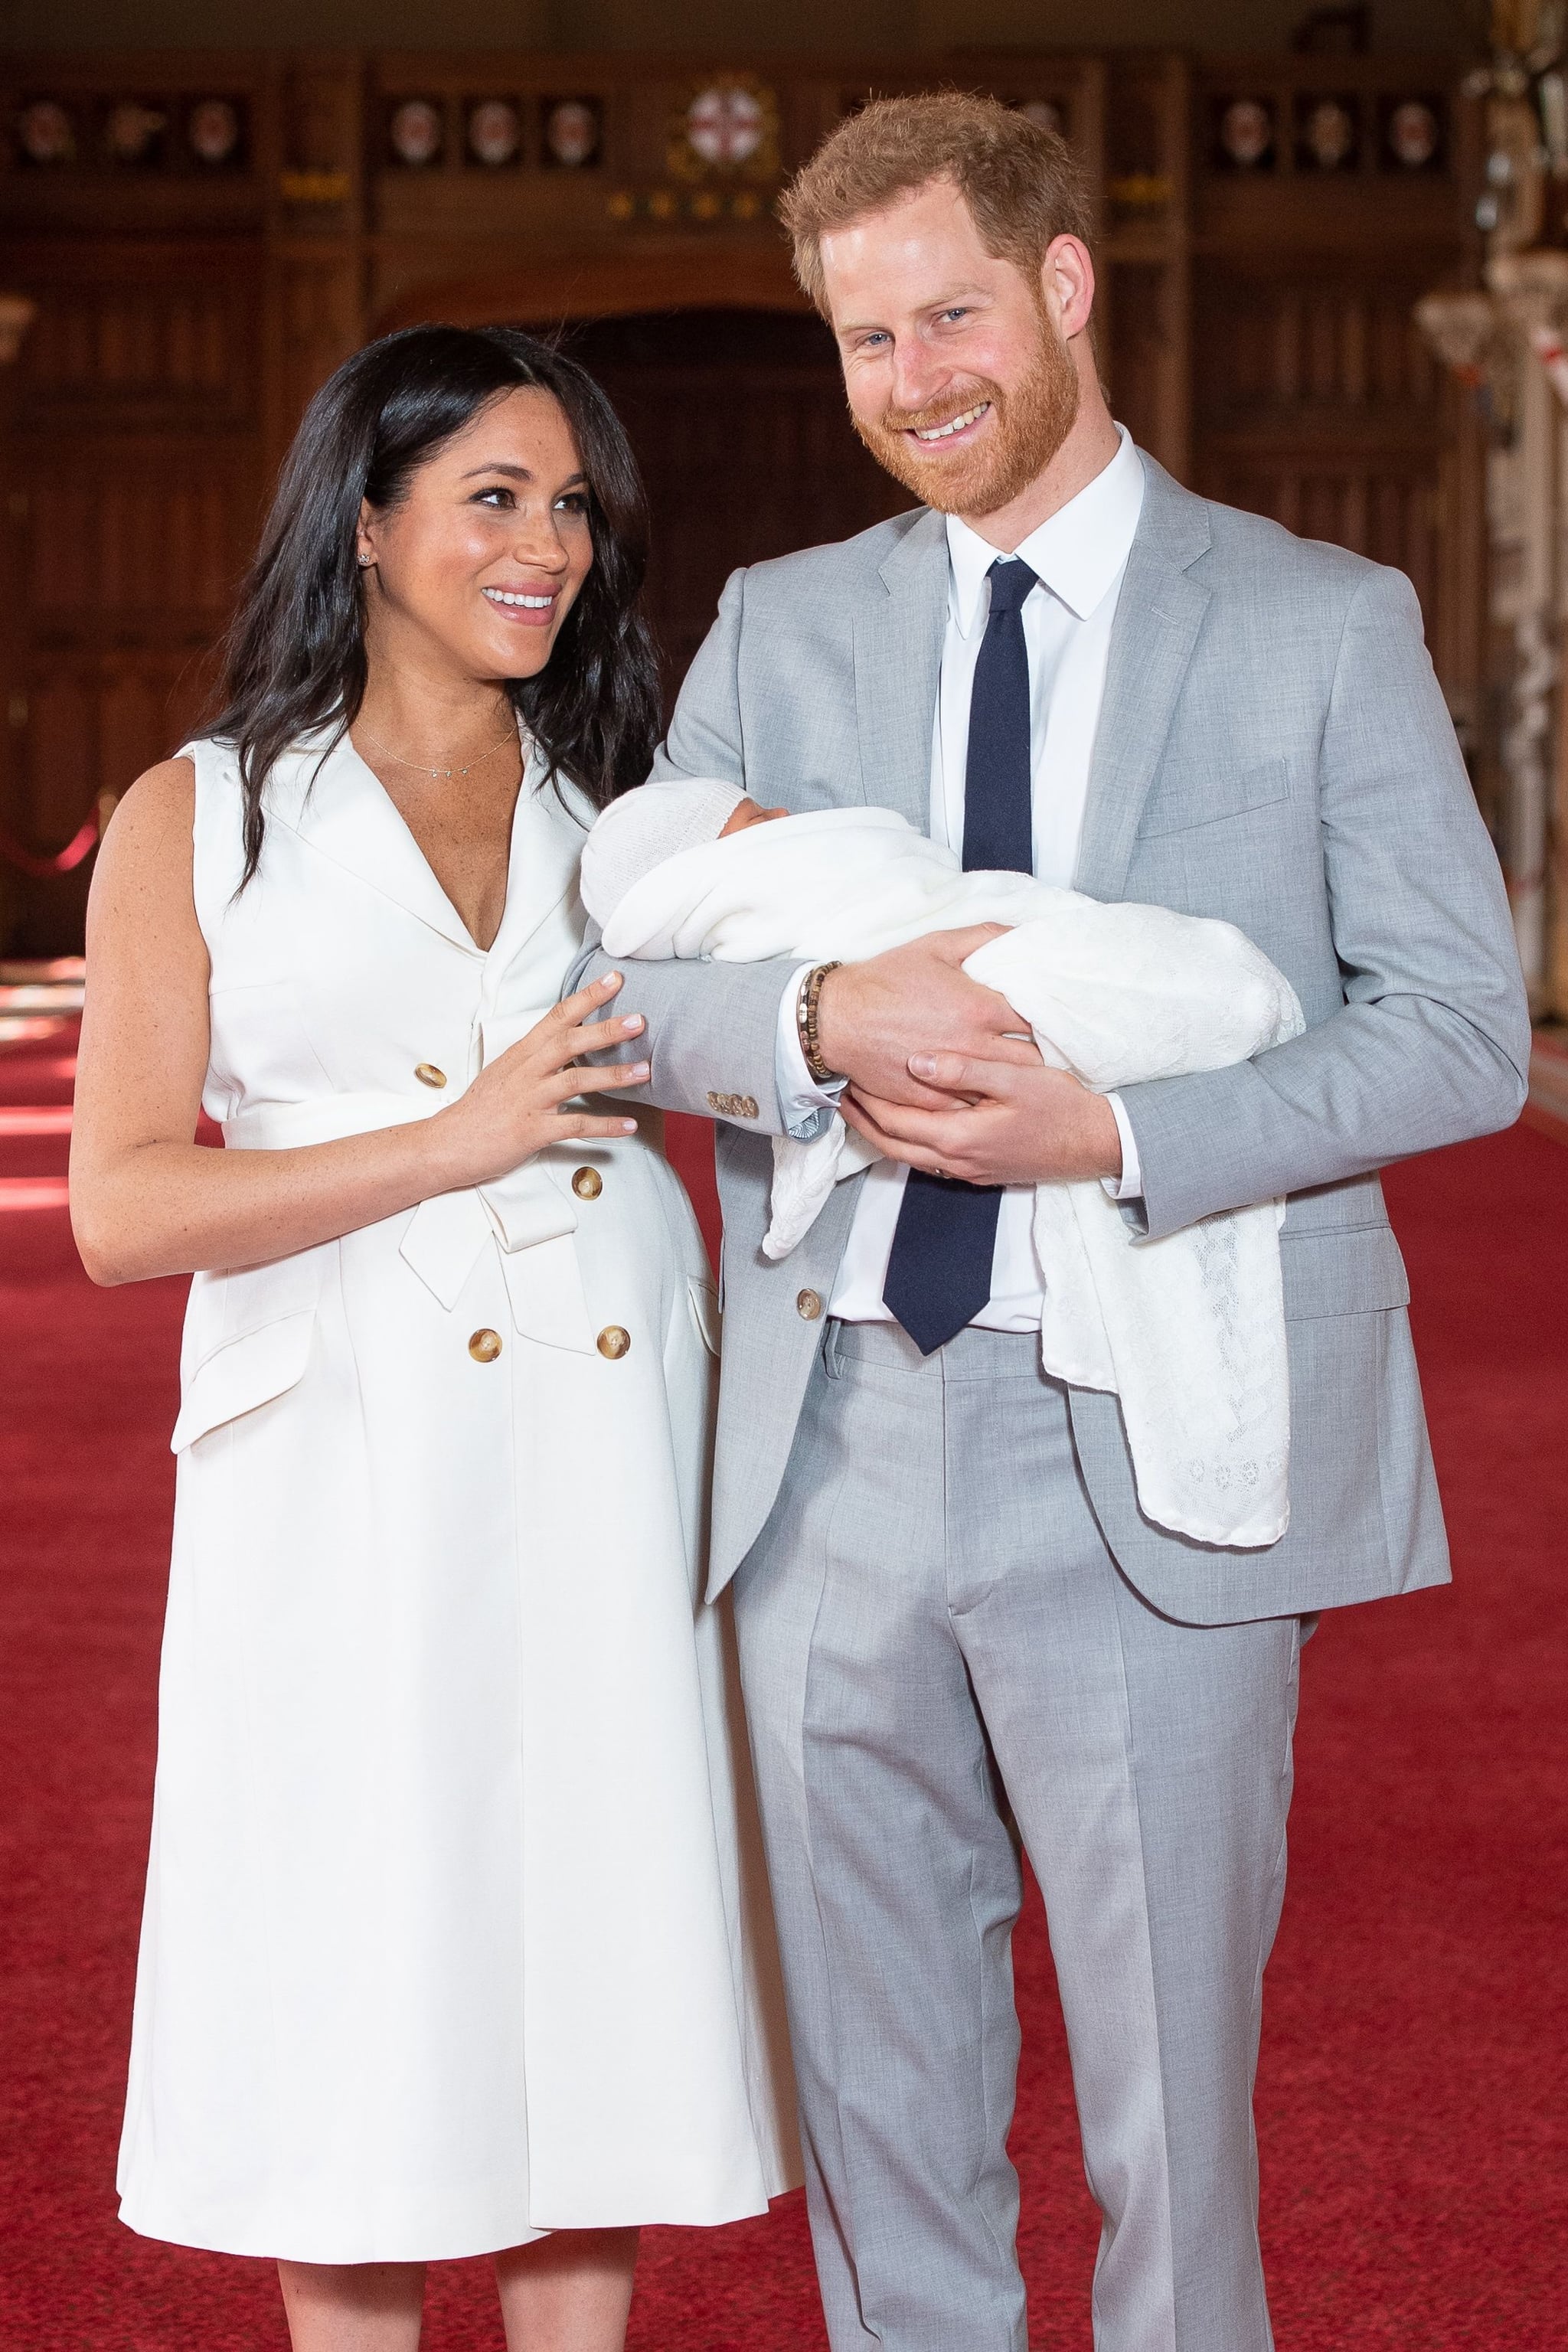 Britain's Prince Harry, Duke of Sussex (R), and his wife Meghan, Duchess of Sussex, pose for a photo with their newborn baby son, Archie Harrison Mountbatten-Windsor, in St George's Hall at Windsor Castle in Windsor, west of London on May 8, 2019. (Photo by Dominic Lipinski / POOL / AFP)        (Photo credit should read DOMINIC LIPINSKI/AFP/Getty Images)